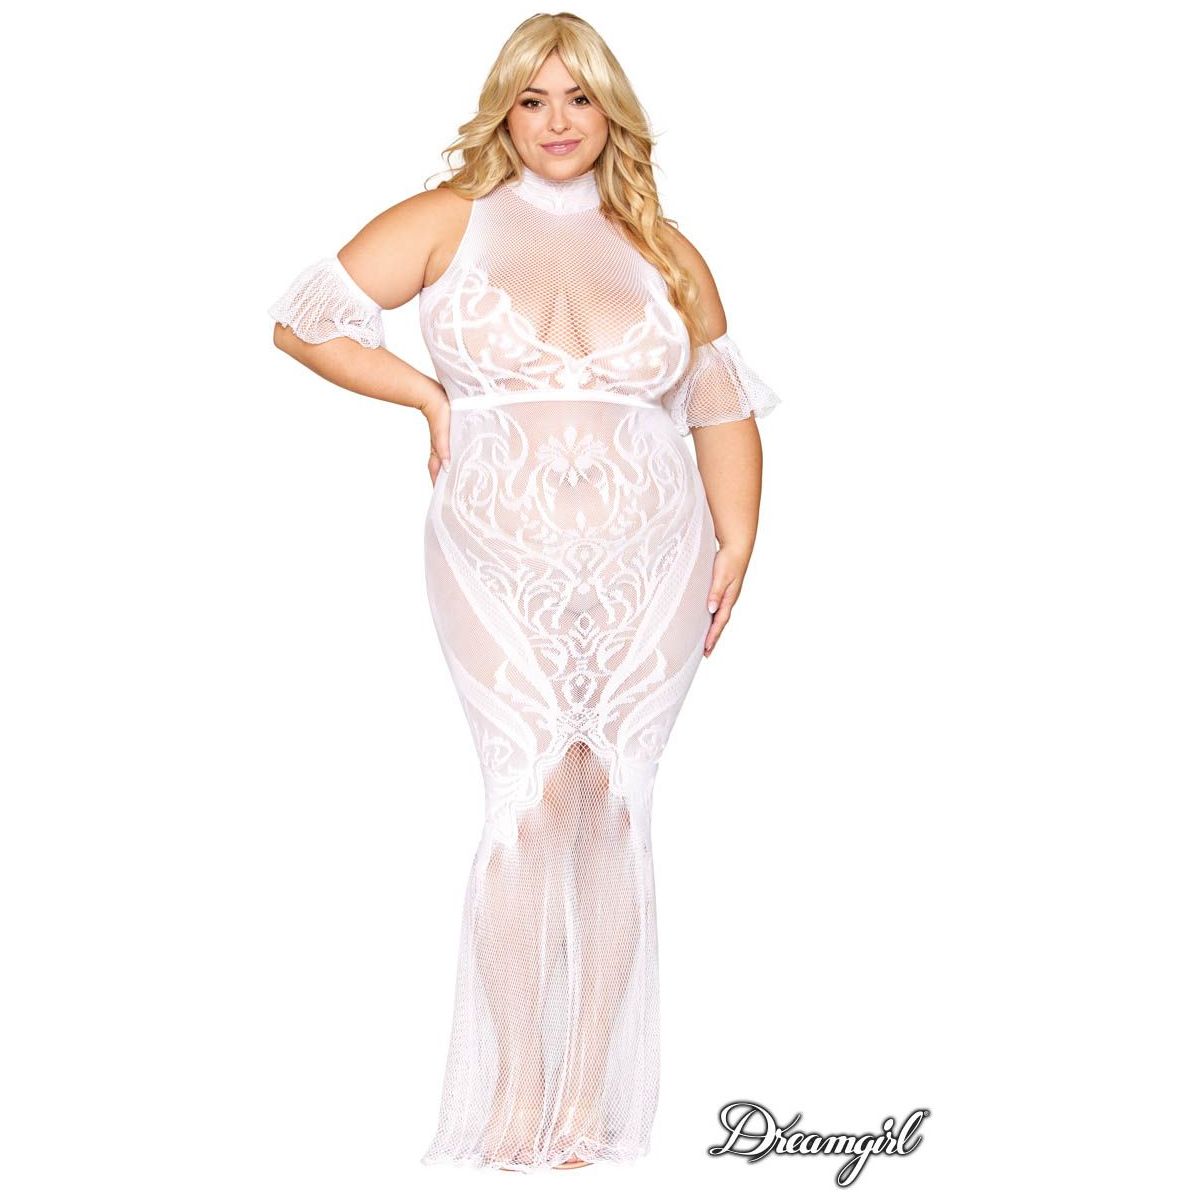 blonde female in white halter neck gown with lace sleeves, mermaid style dress 